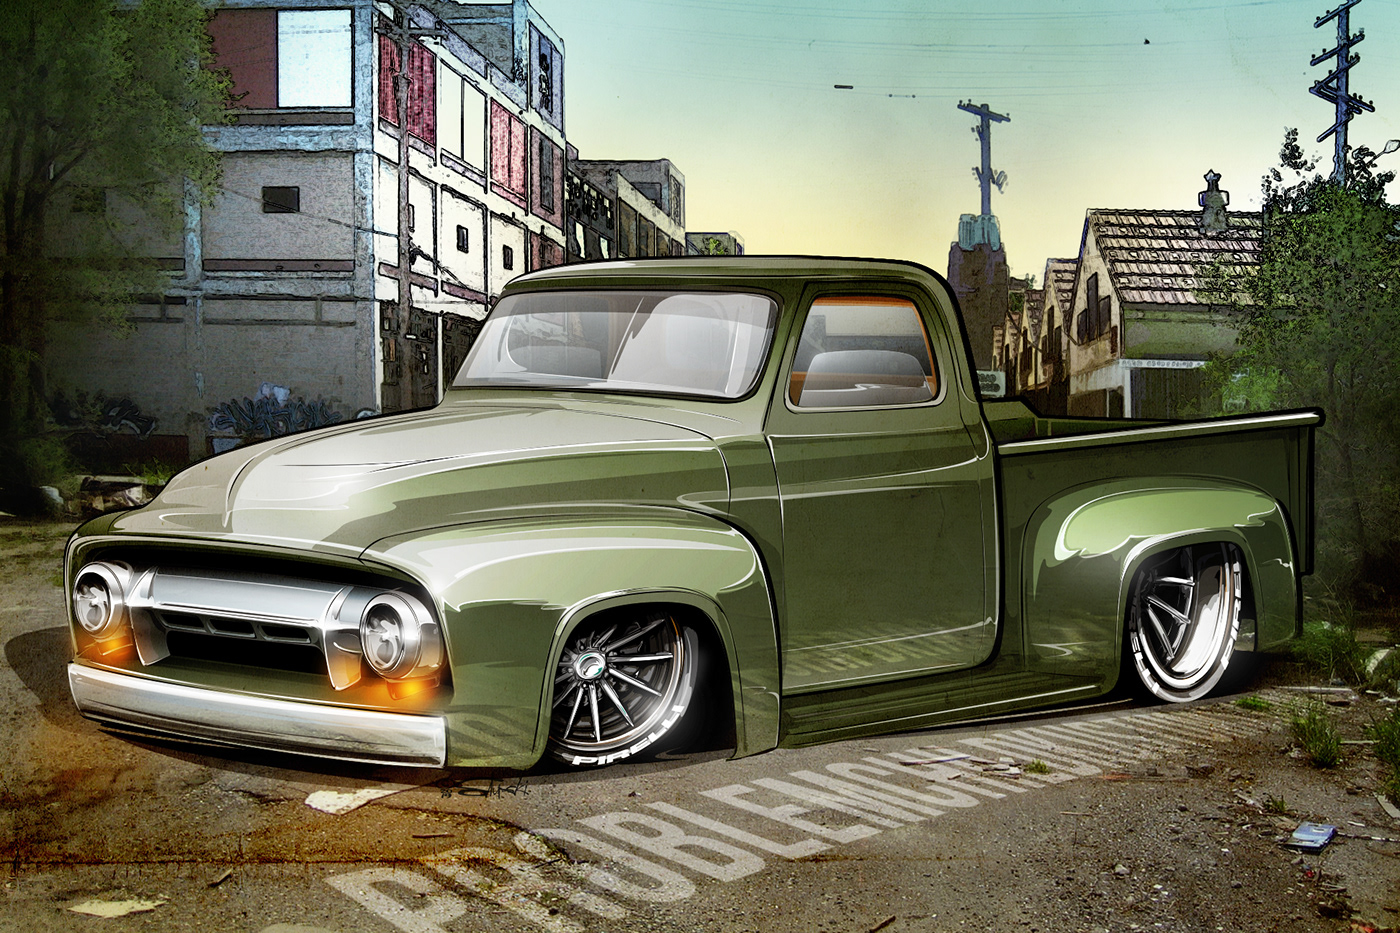 Concept art for a custom Ford pickup truck illustrated in vector by Automotive Artist Brian Stupski 